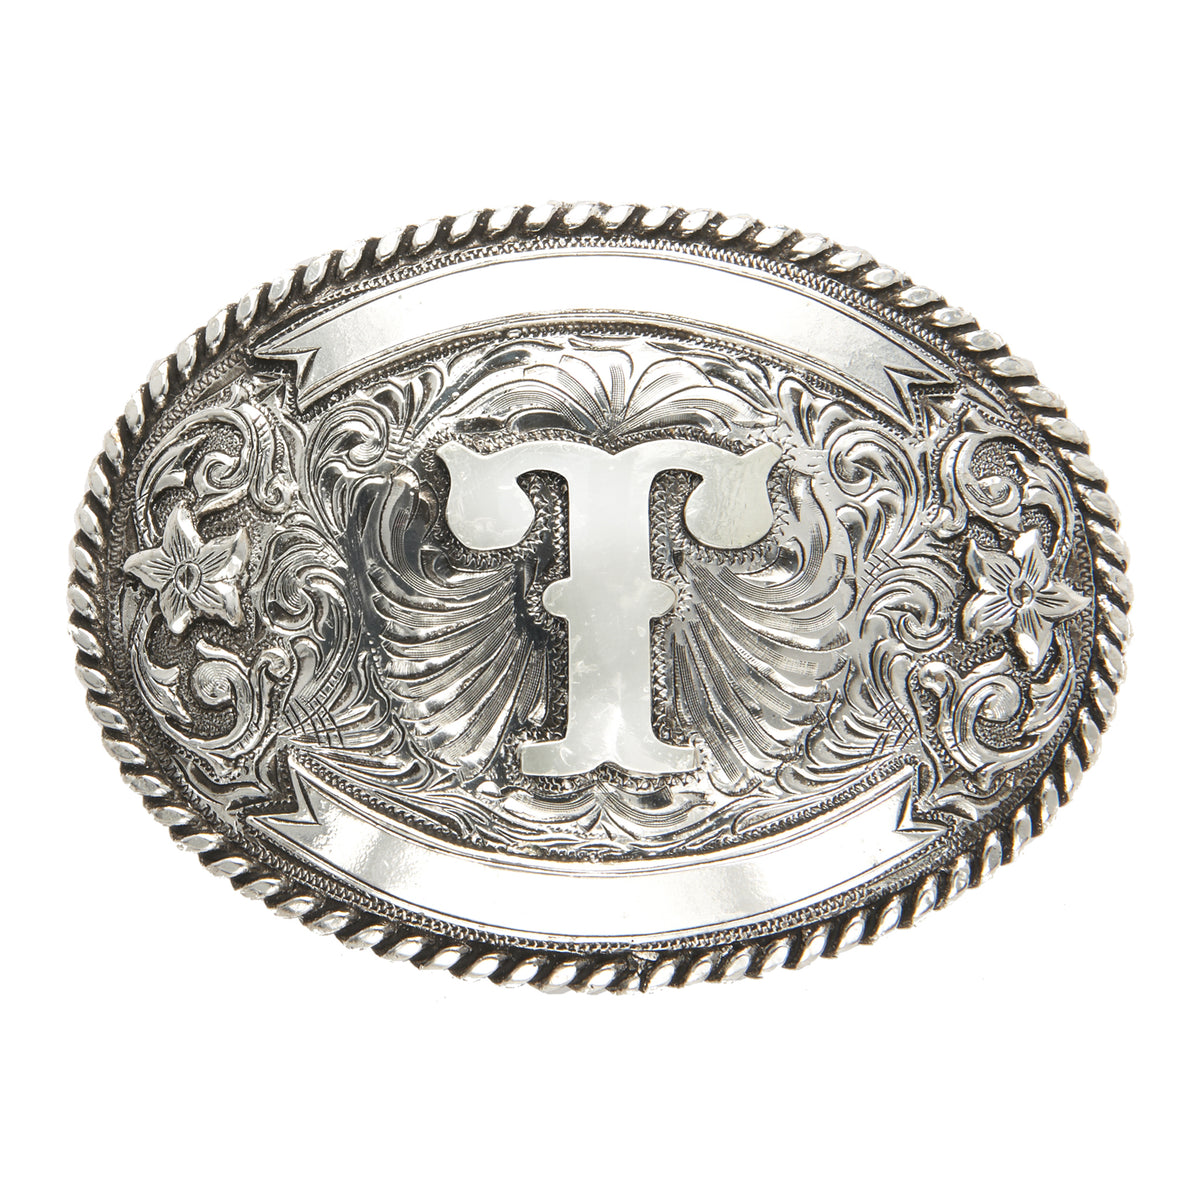 Initial “T” Buckle